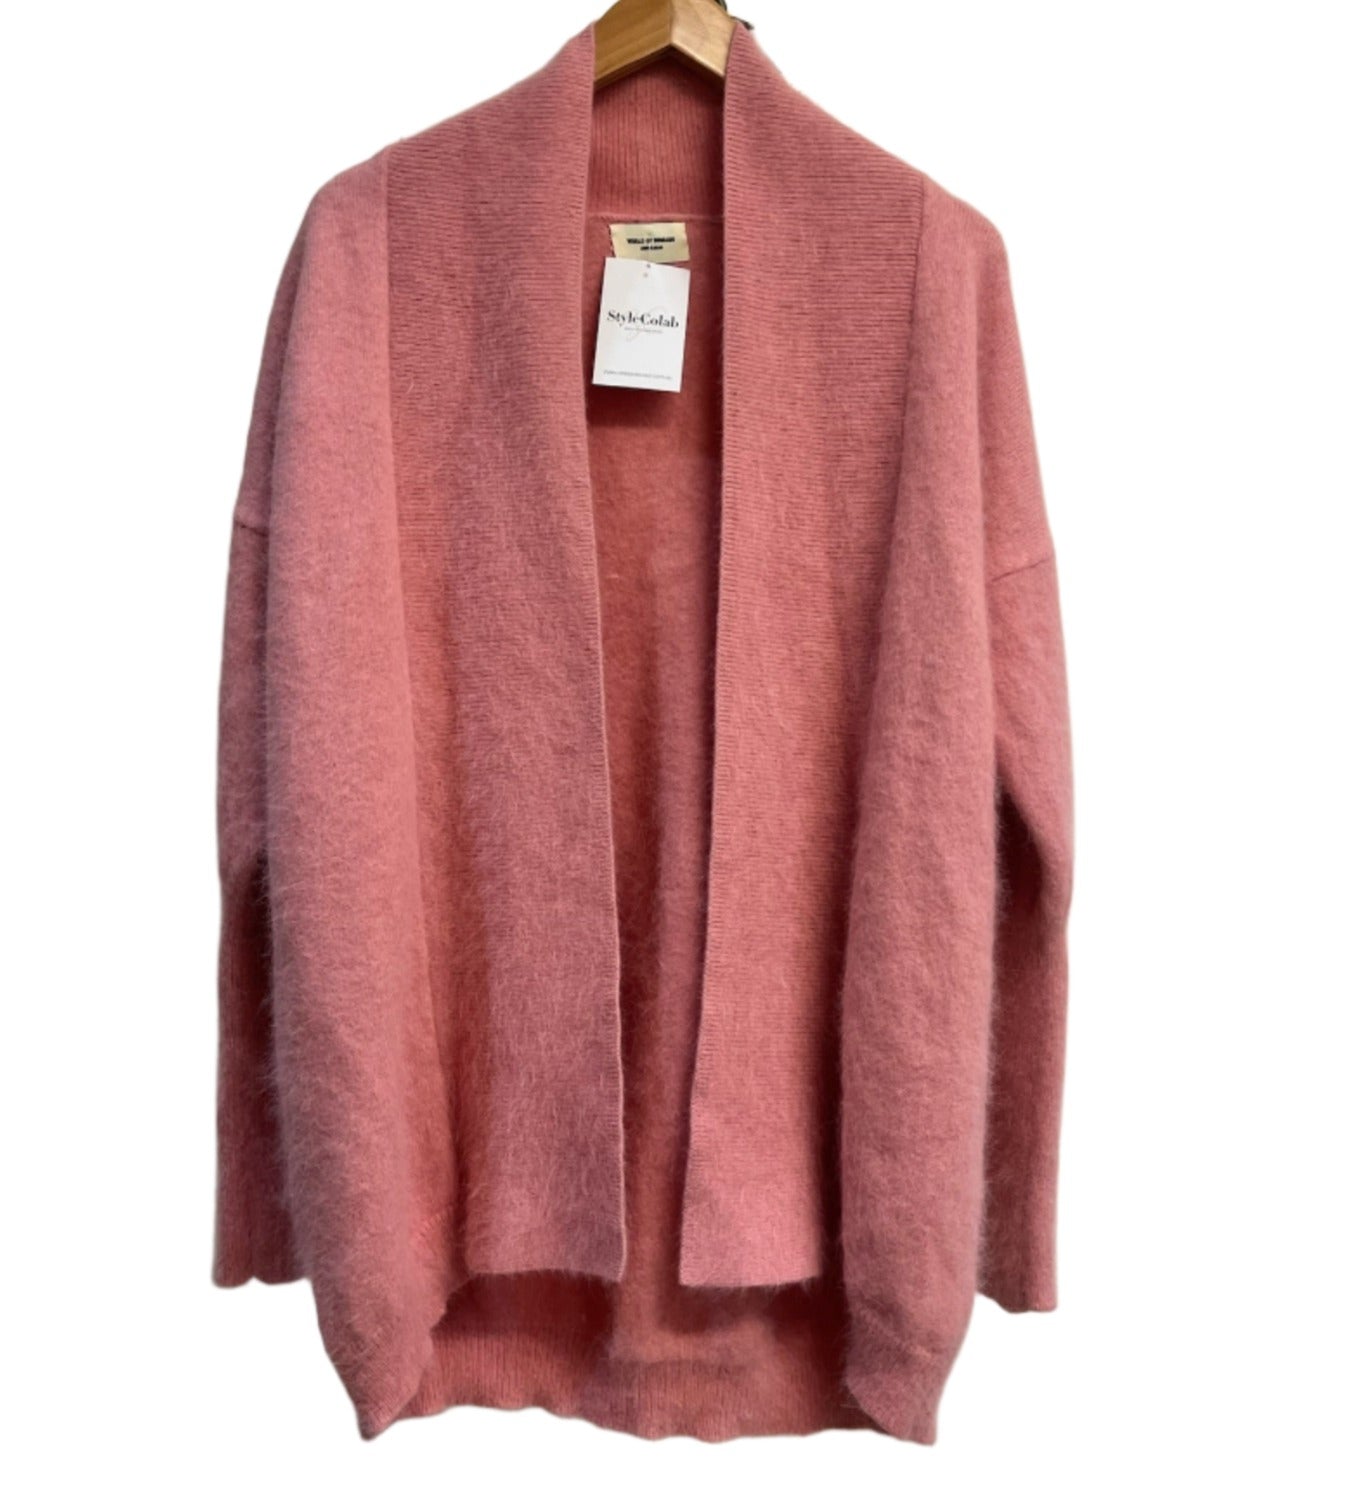 World of Nomads Pink Top OS